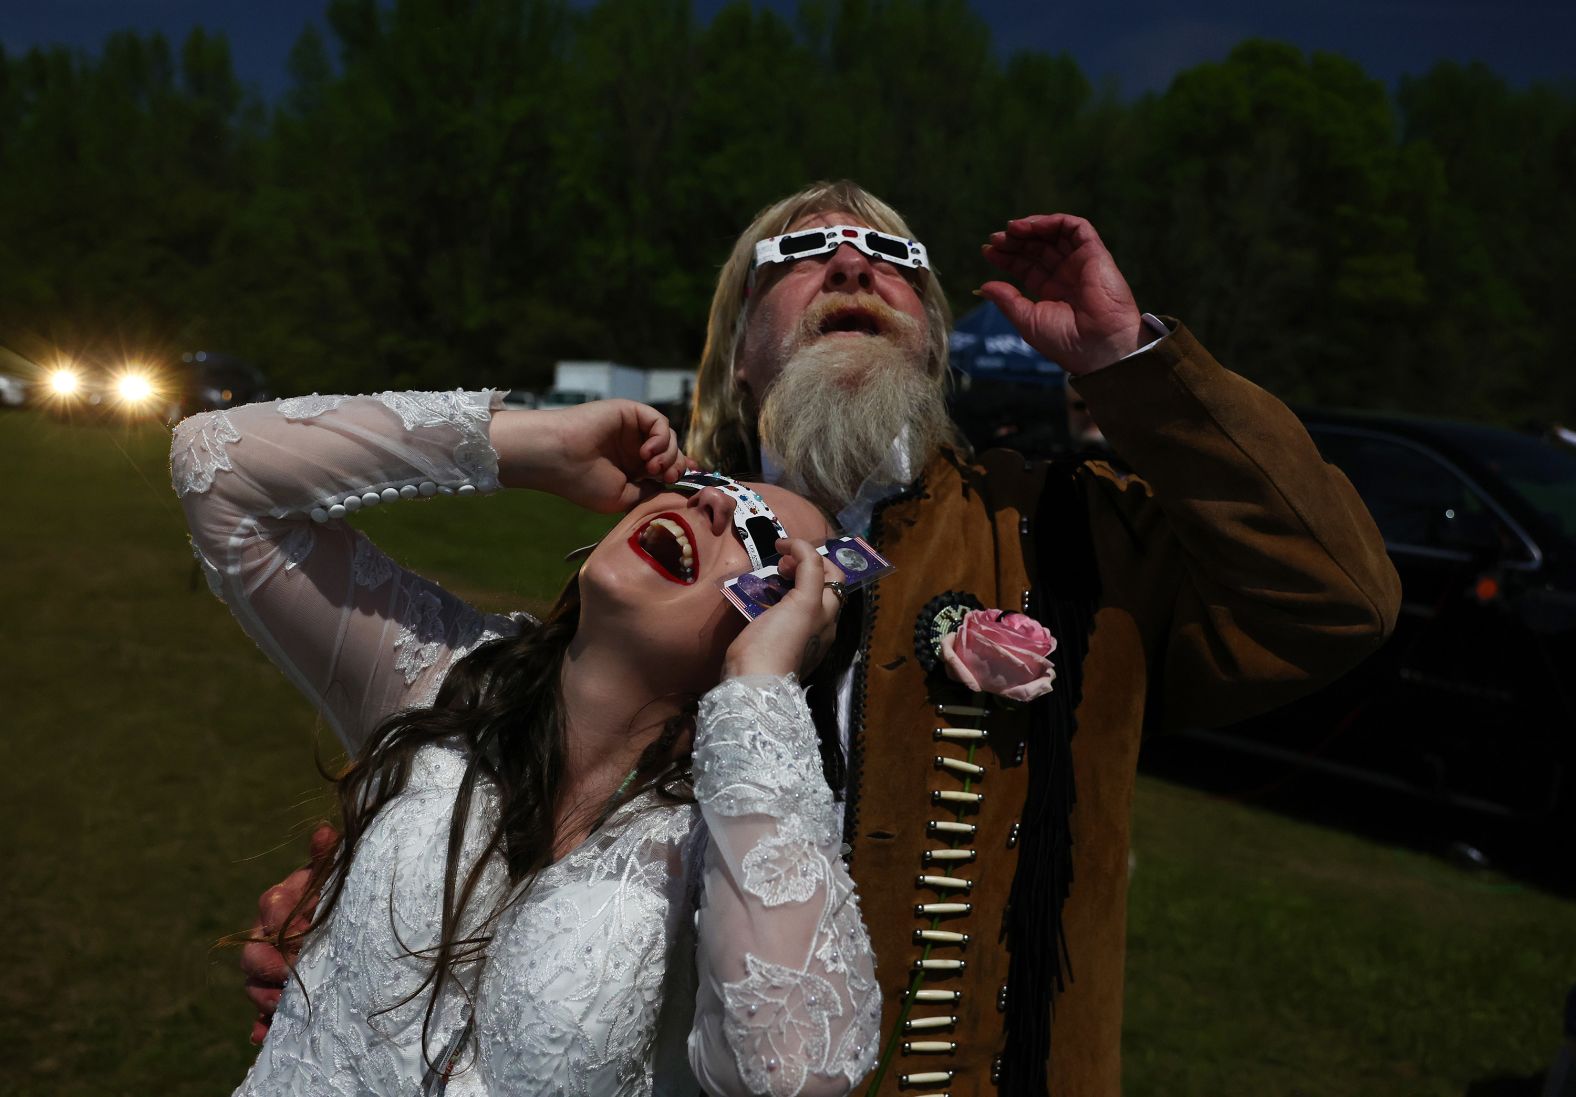 A newly married couple views the eclipse after a <a href="https://www.cnn.com/world/live-news/total-solar-eclipse-04-08-24-scn/h_c5bf02a1f61852f076e1c082cd6f6290" target="_blank">mass wedding</a> in Russellville, Arkansas. They were one of 358 couples who tied the knot at an "Elope at the Eclipse" event.